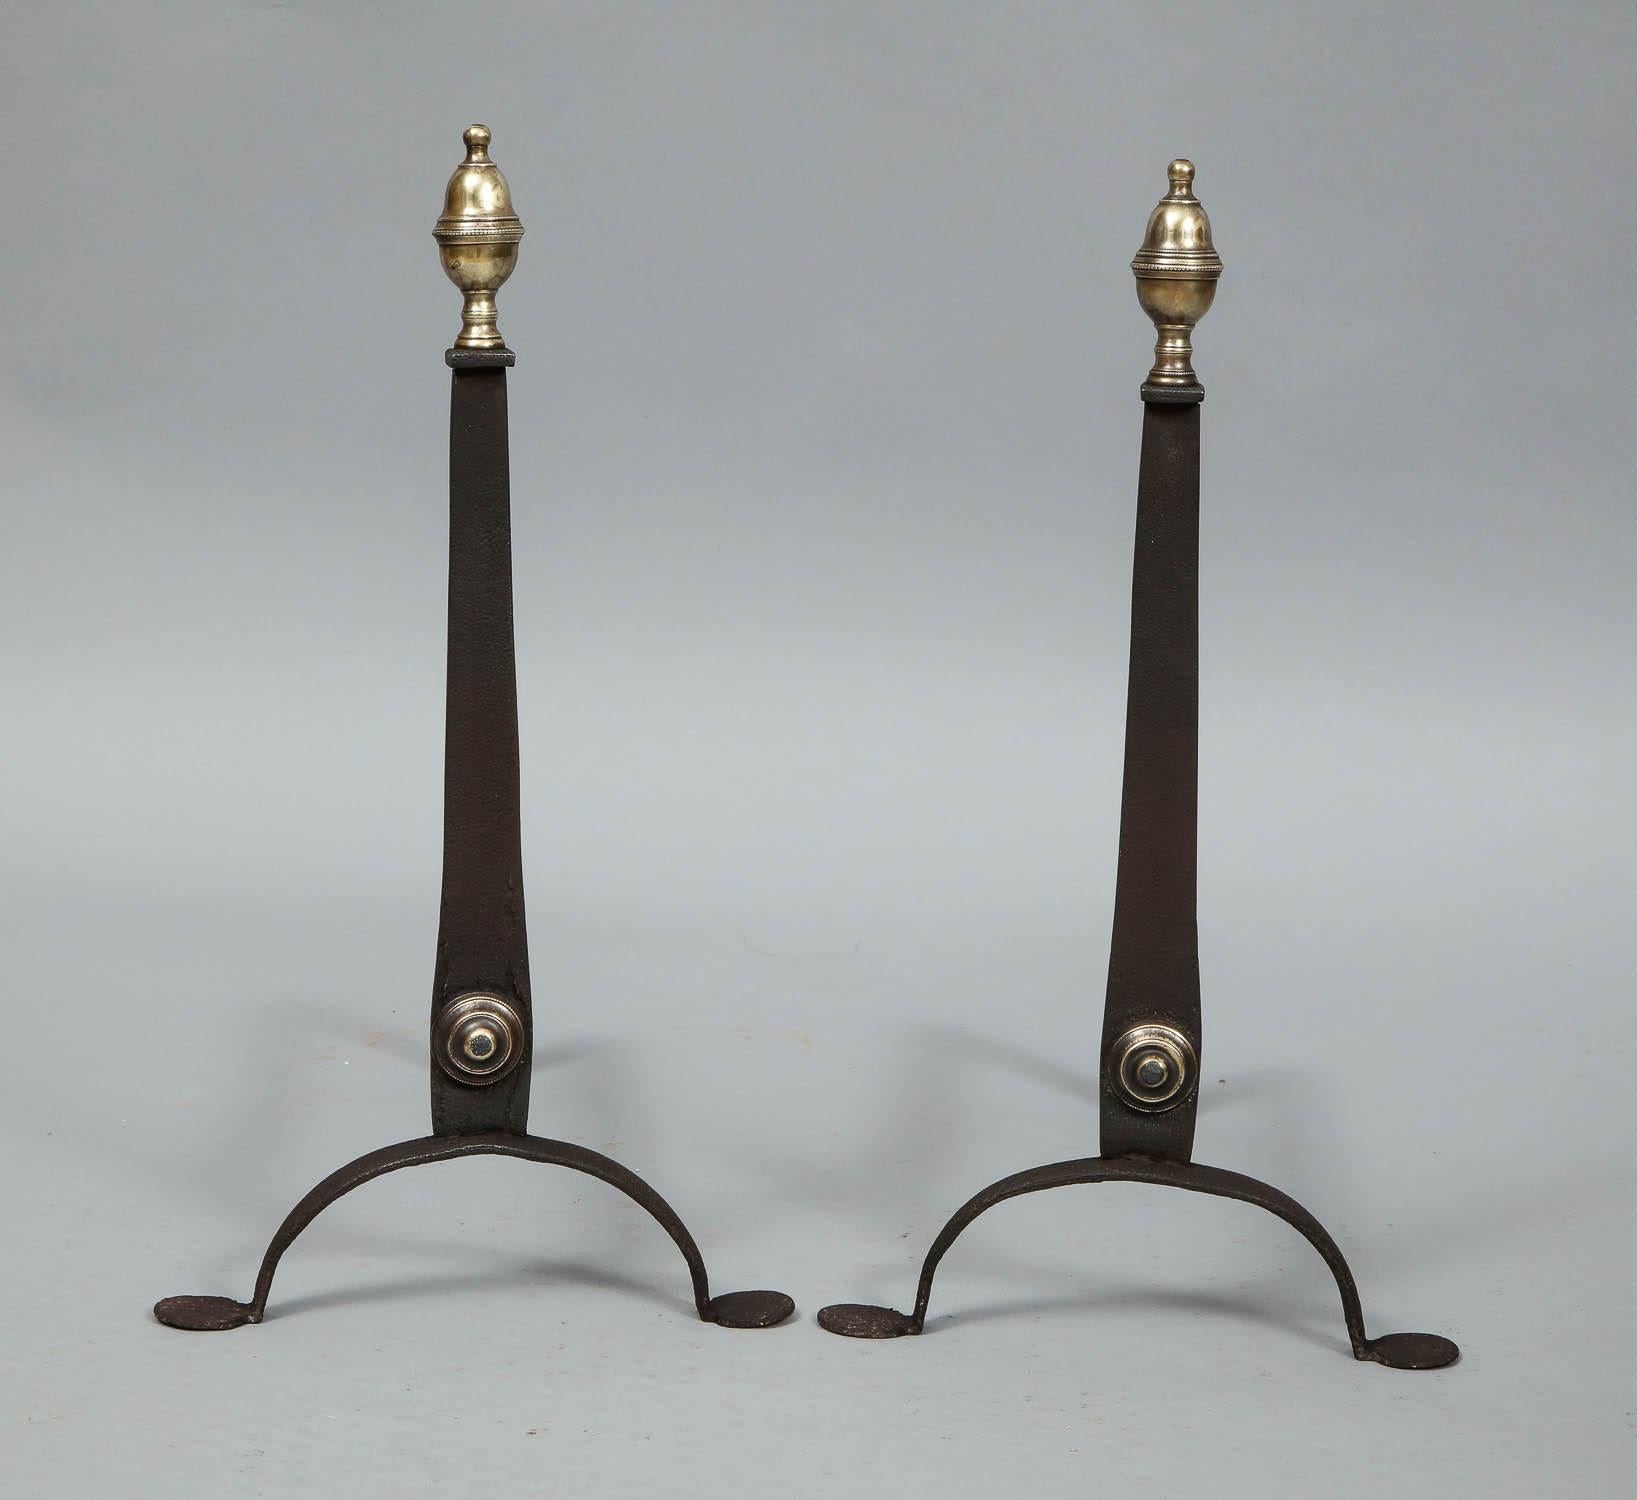 A pair of 18th century andirons with knife blade shafts having brass urn finials and shaft buttons standing on arched legs with penny feet, American, circa 1770.
 